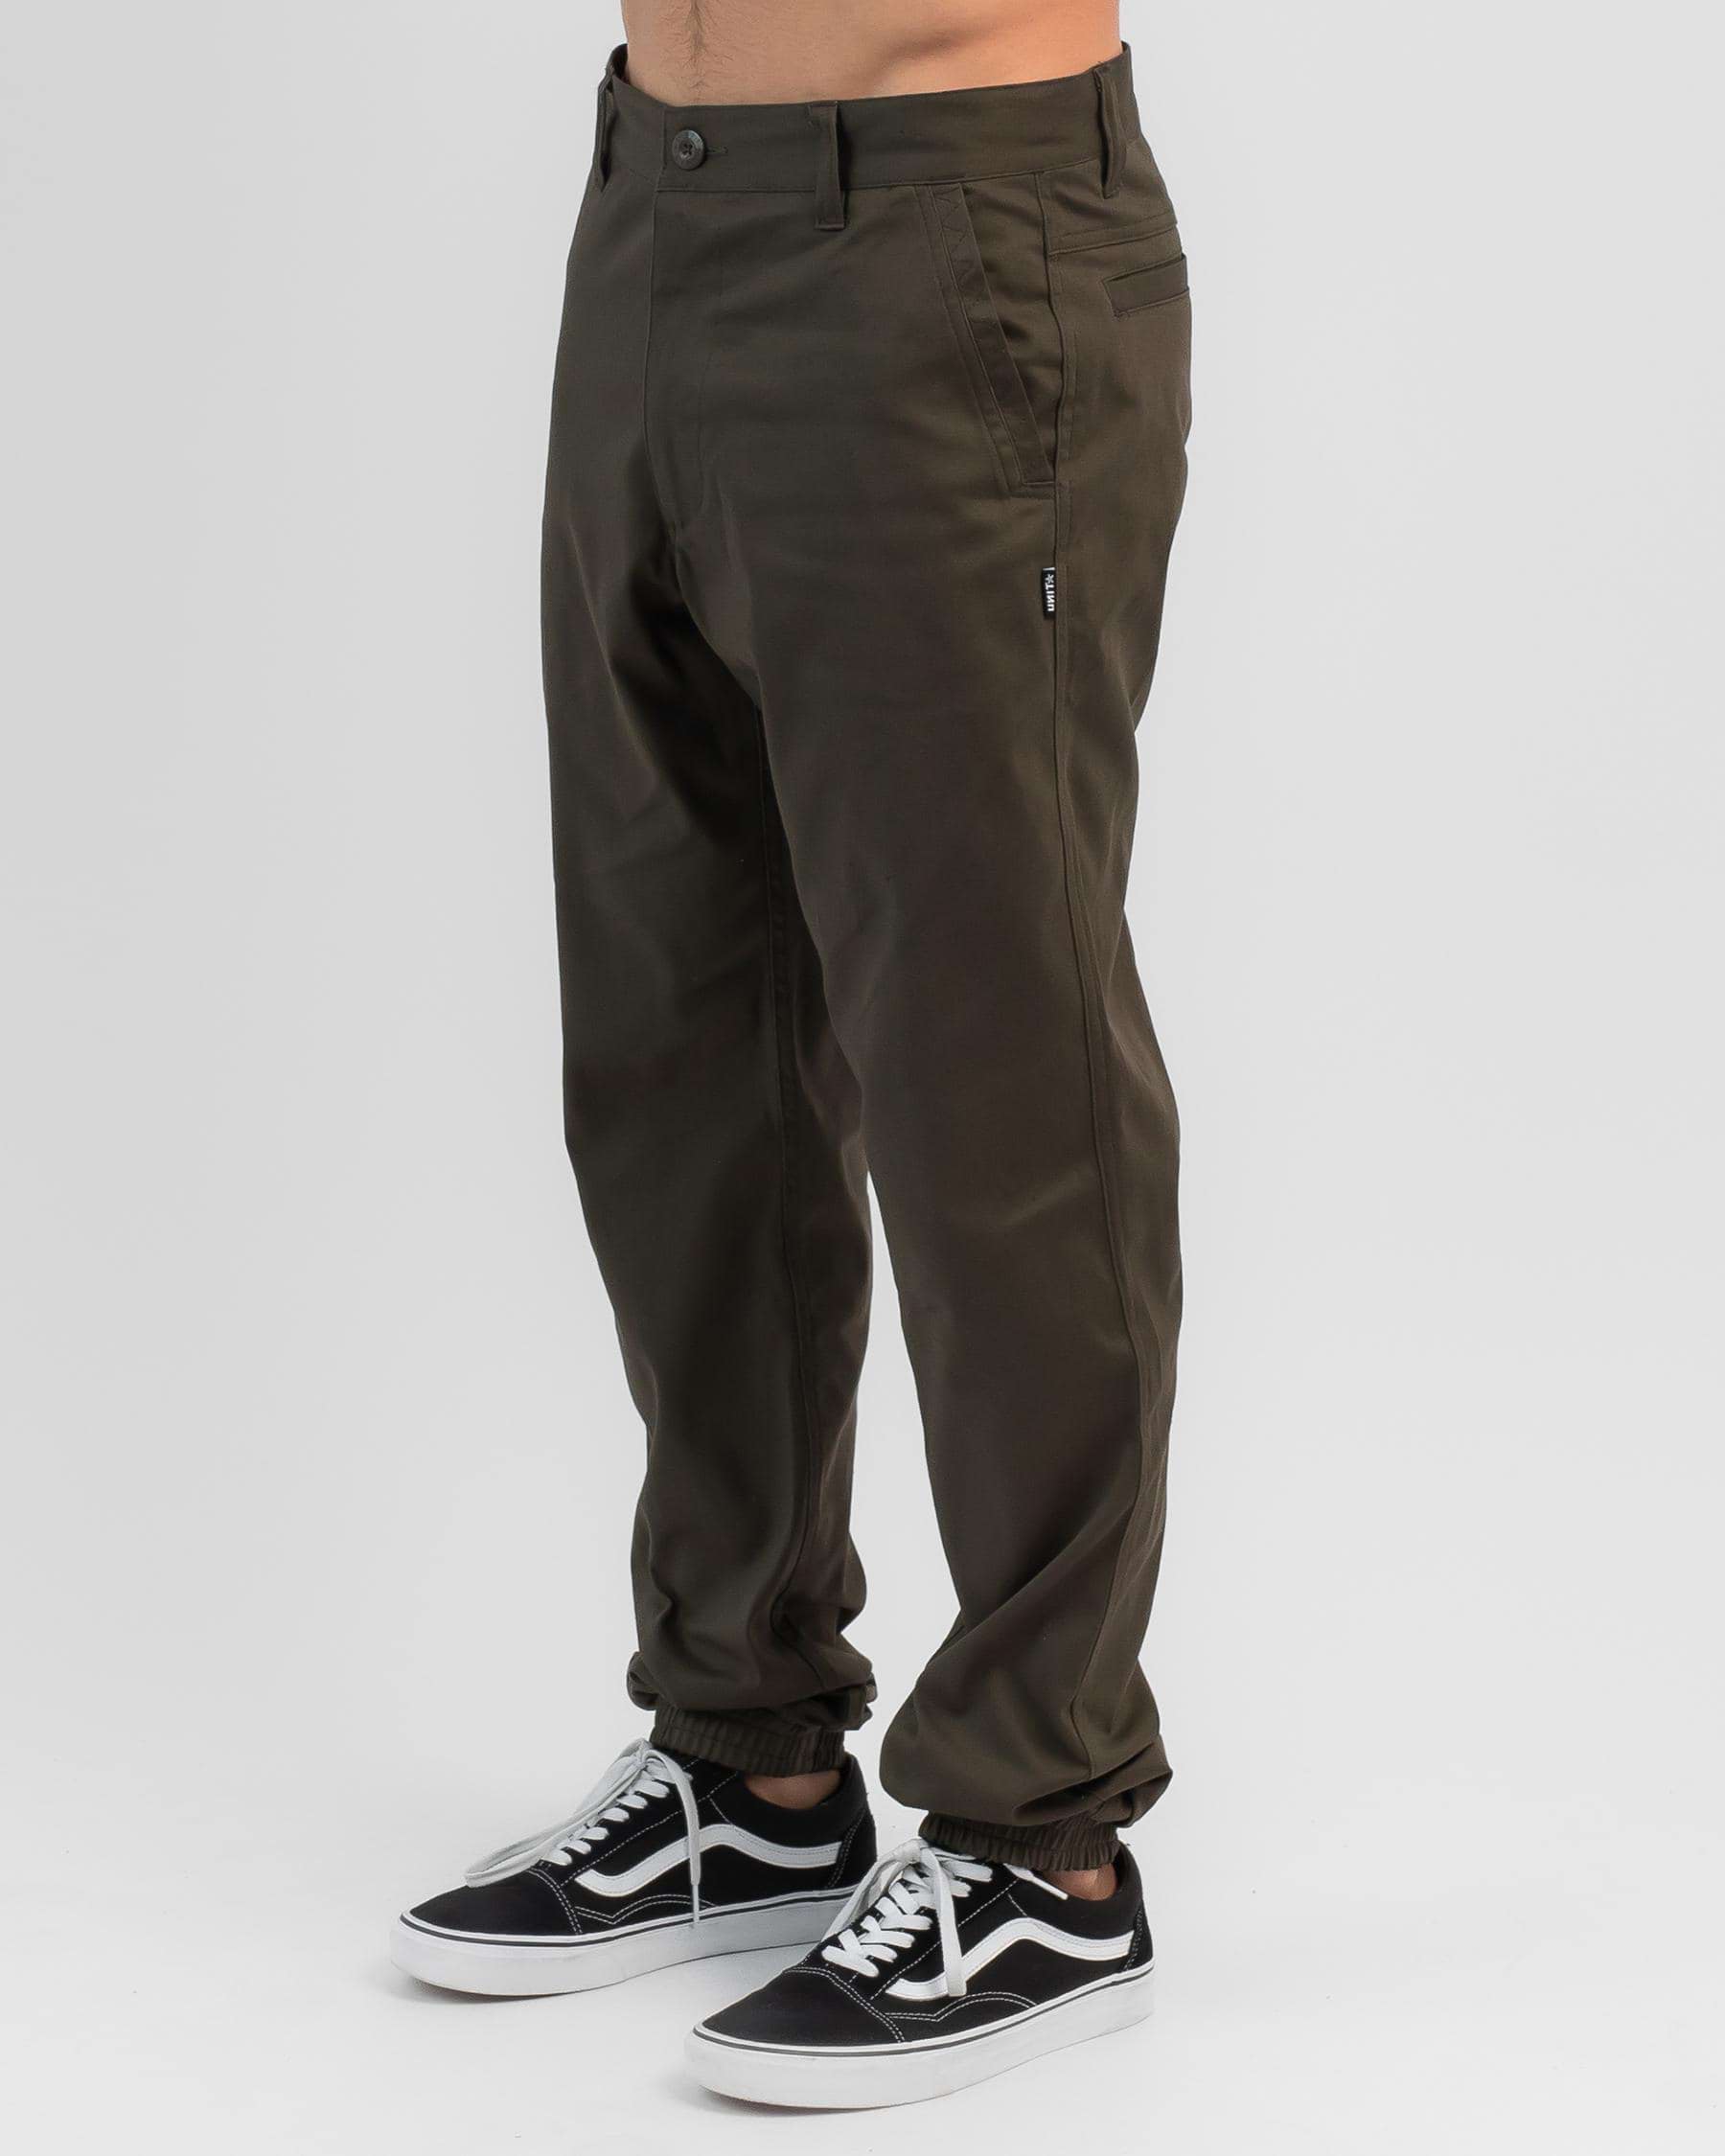 Shop Unit Rockbottom Pants In Military - Fast Shipping & Easy Returns ...